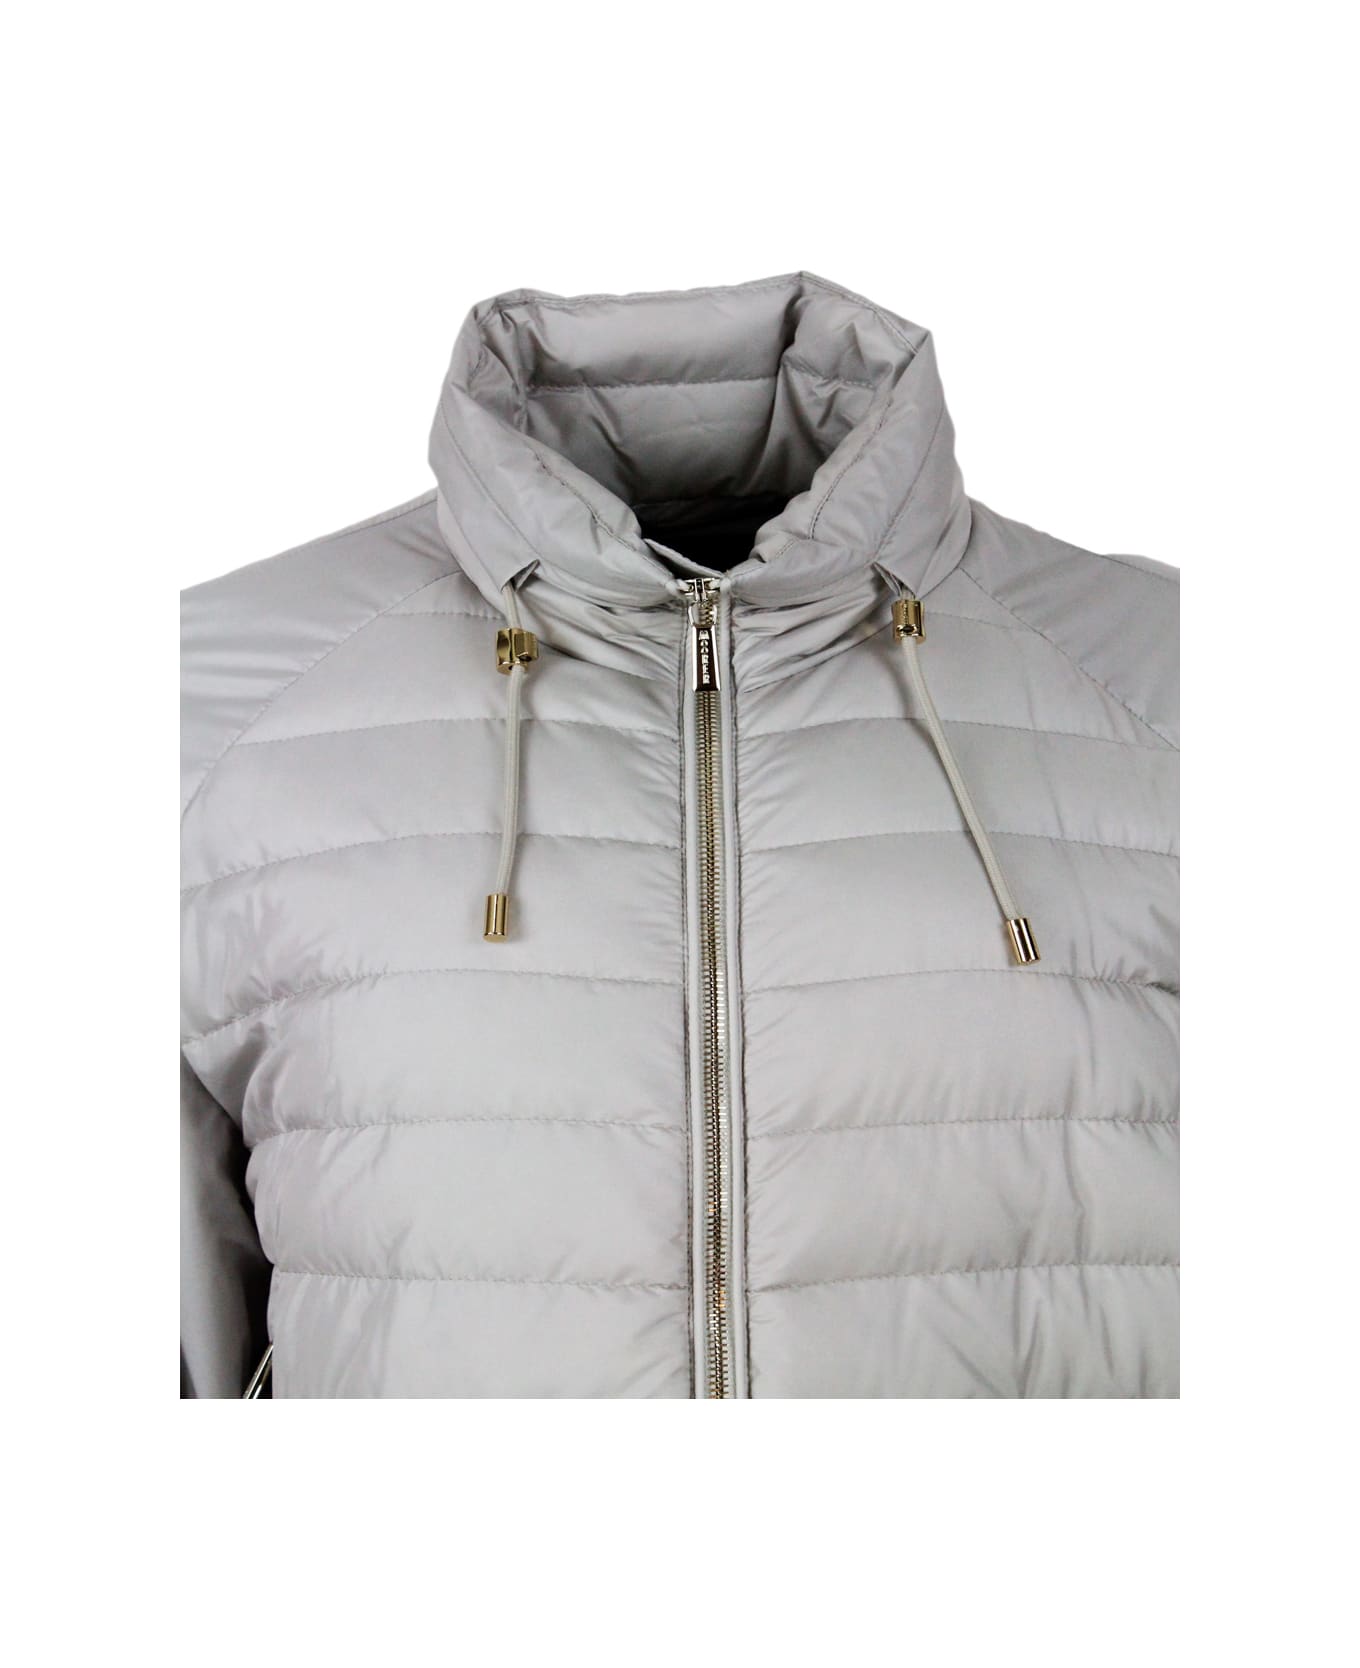 Moorer Lightweight 100 Gram Fine Down Jacket With An A-line Shape And Adjustable Drawstring At The Hem And Neck. Zip Closure - Ice ダウンジャケット